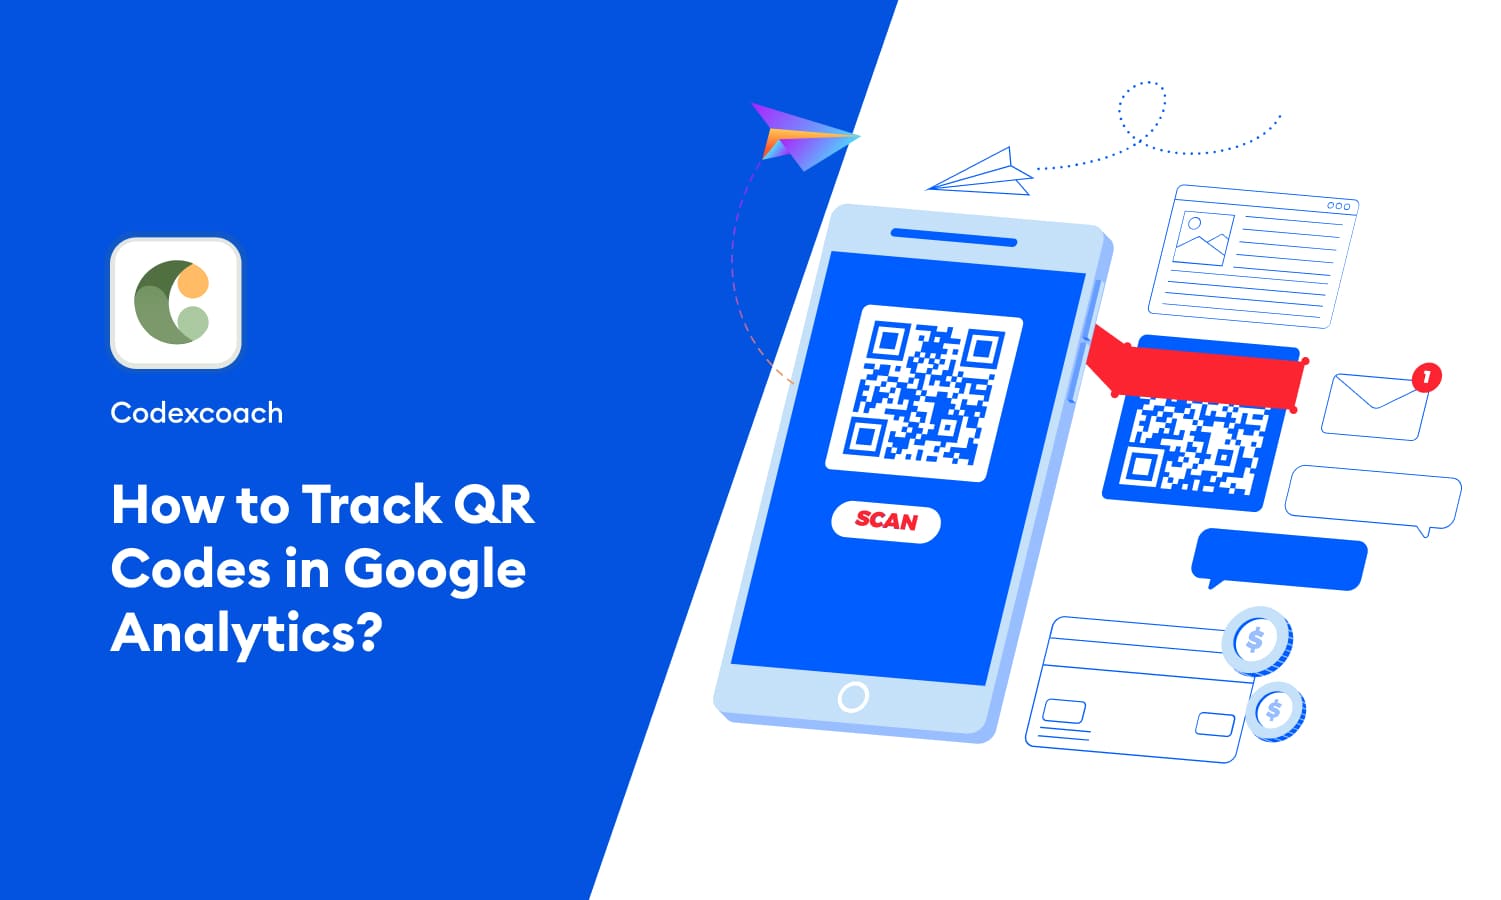 How to Track QR Codes in Google Analytics